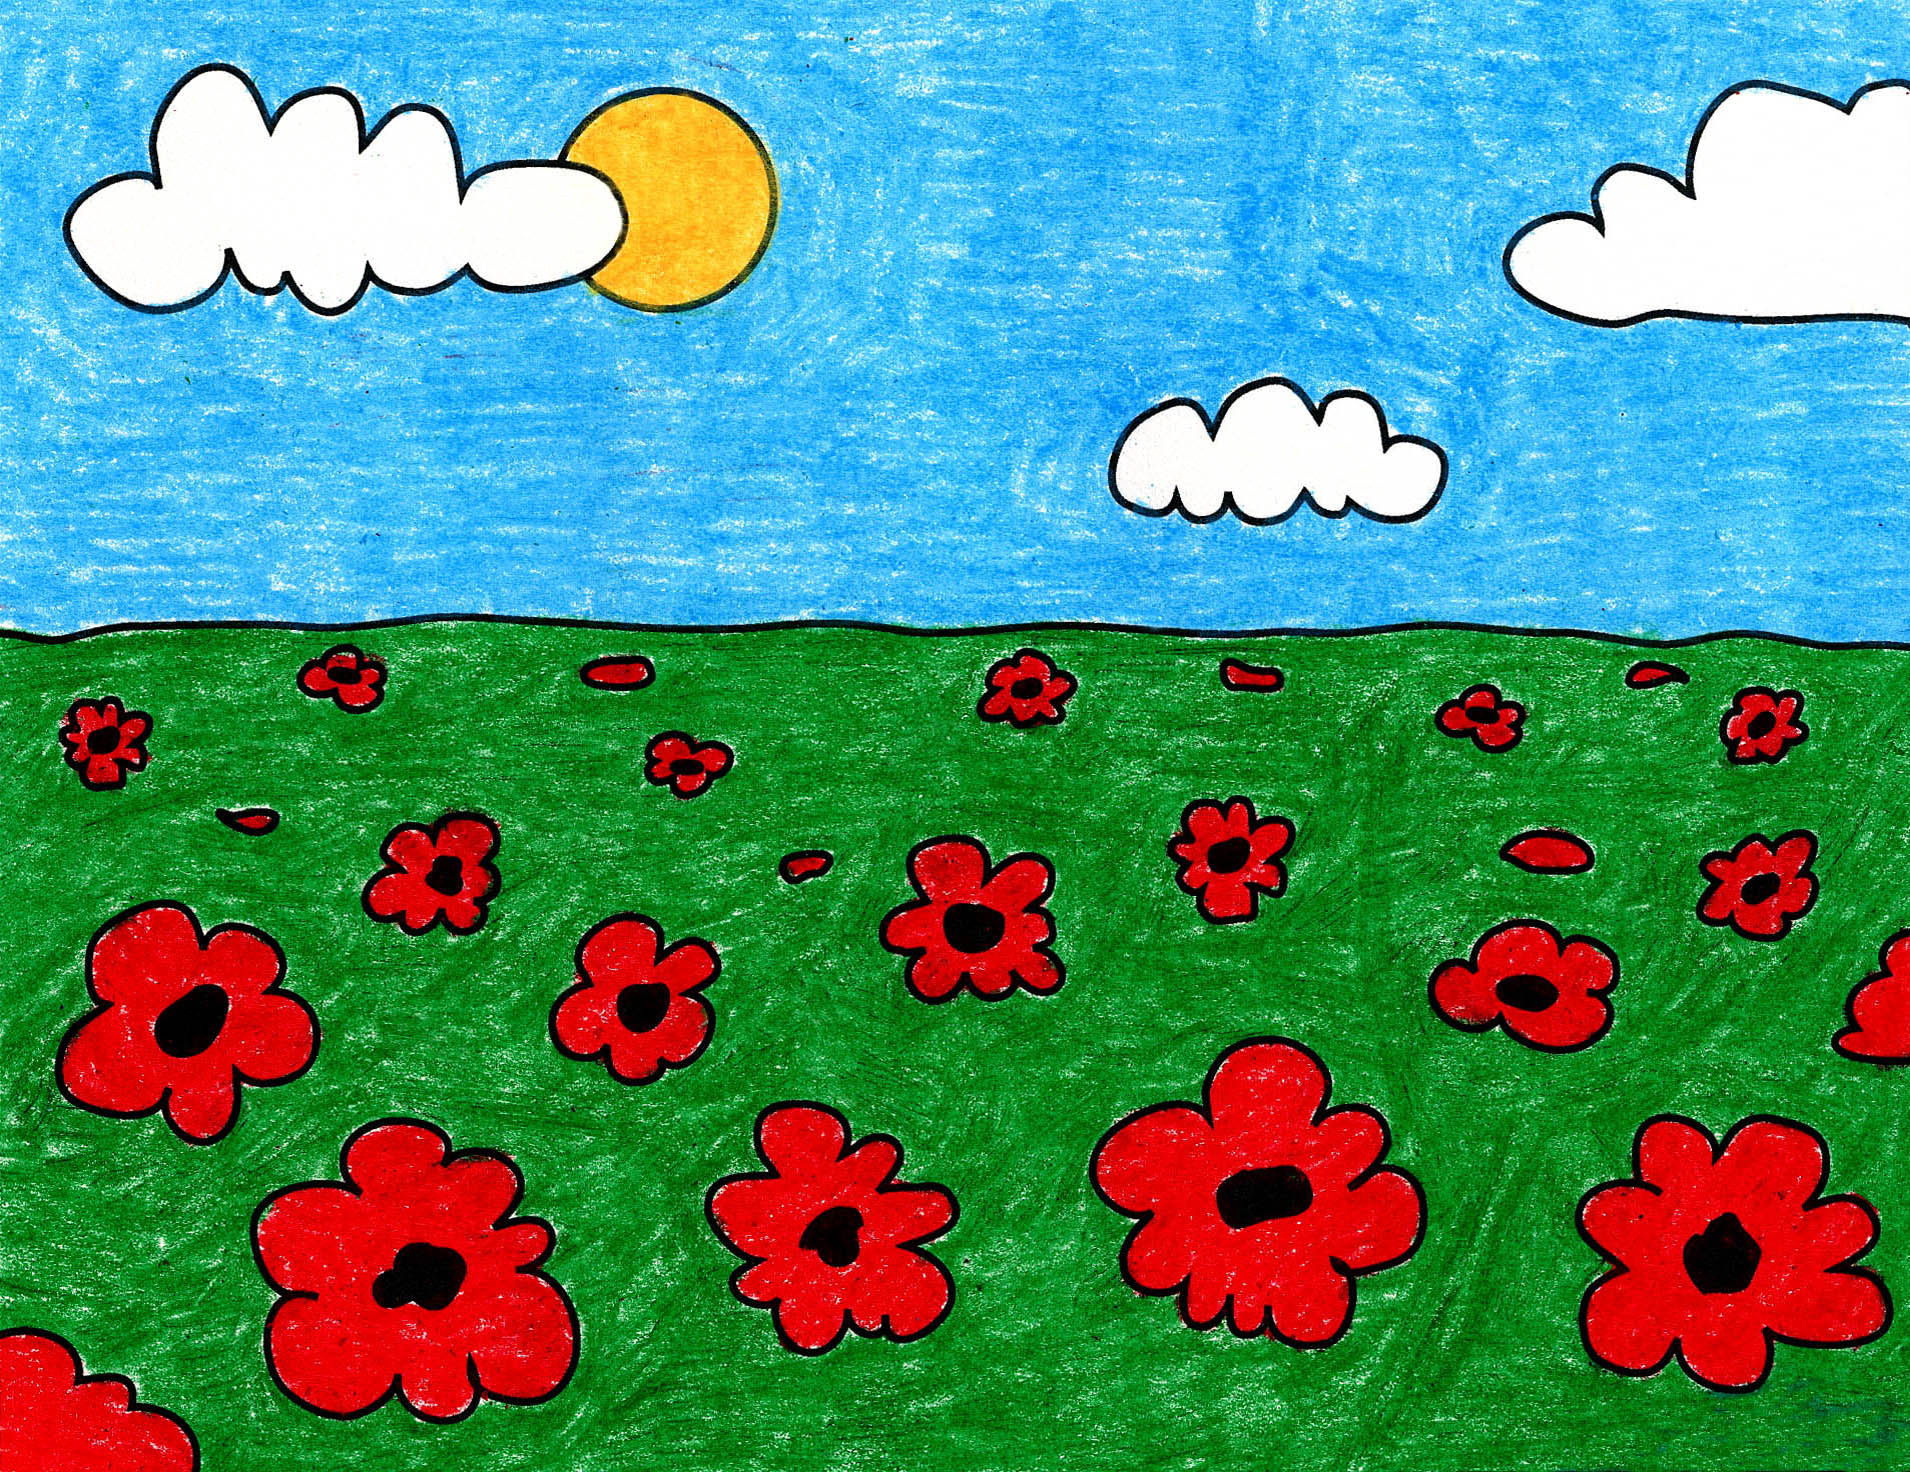 Draw A Field Of Poppies Art Projects For Kids Illustrate your favorite story by drawing a pristine forest inhabited by wild animals or fairy tale creatures. draw a field of poppies art projects